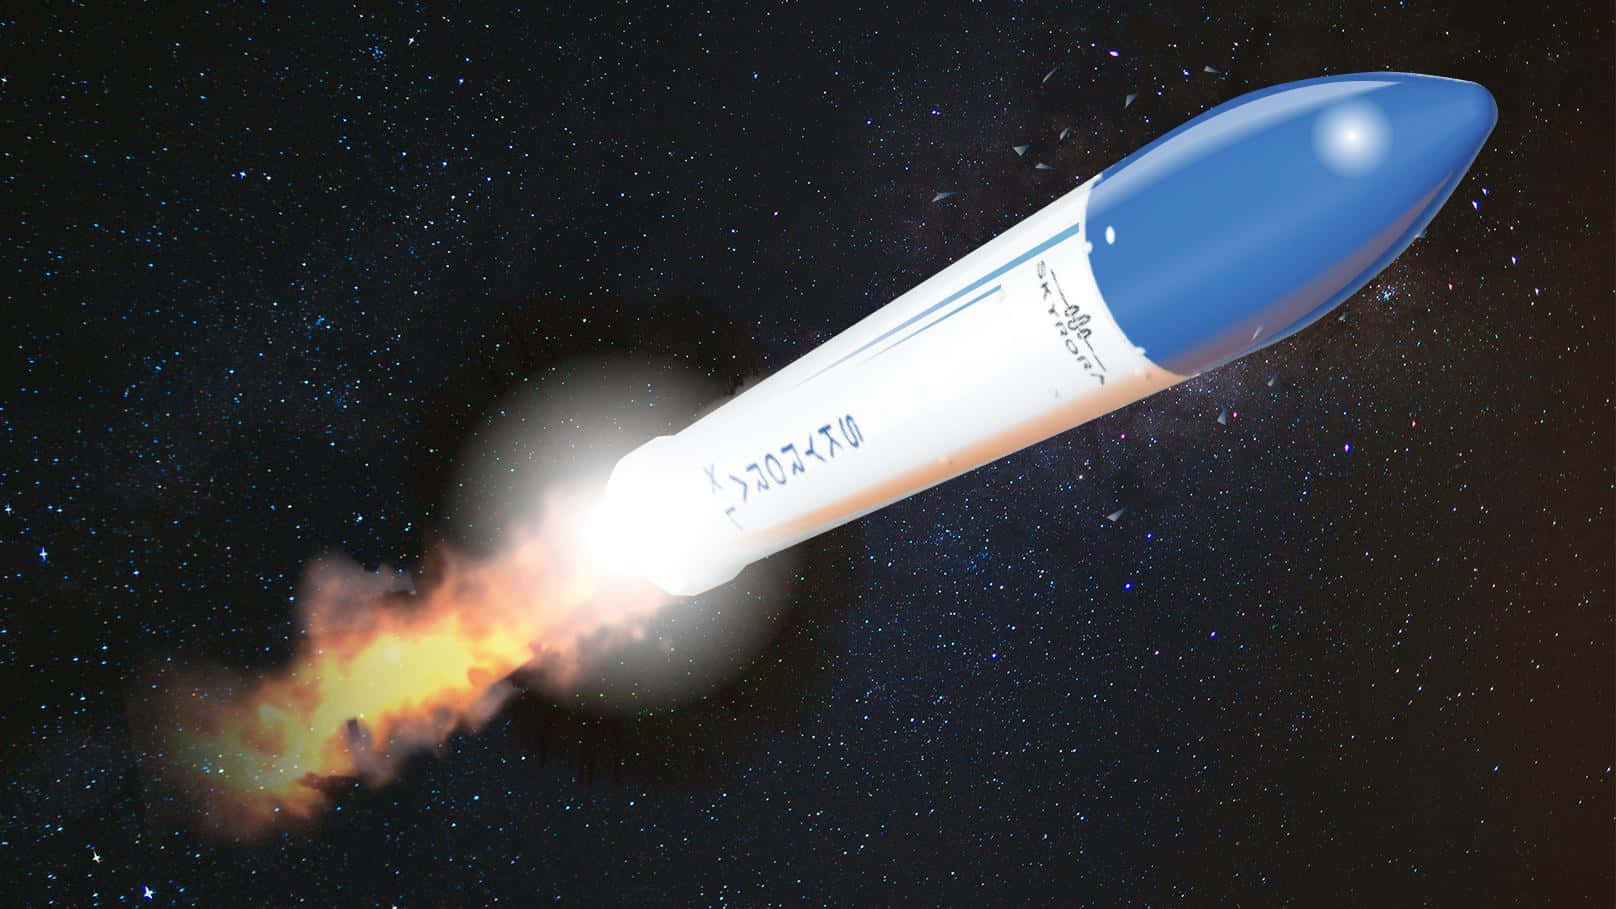 A rocketship blasting off, powered by innovative technology